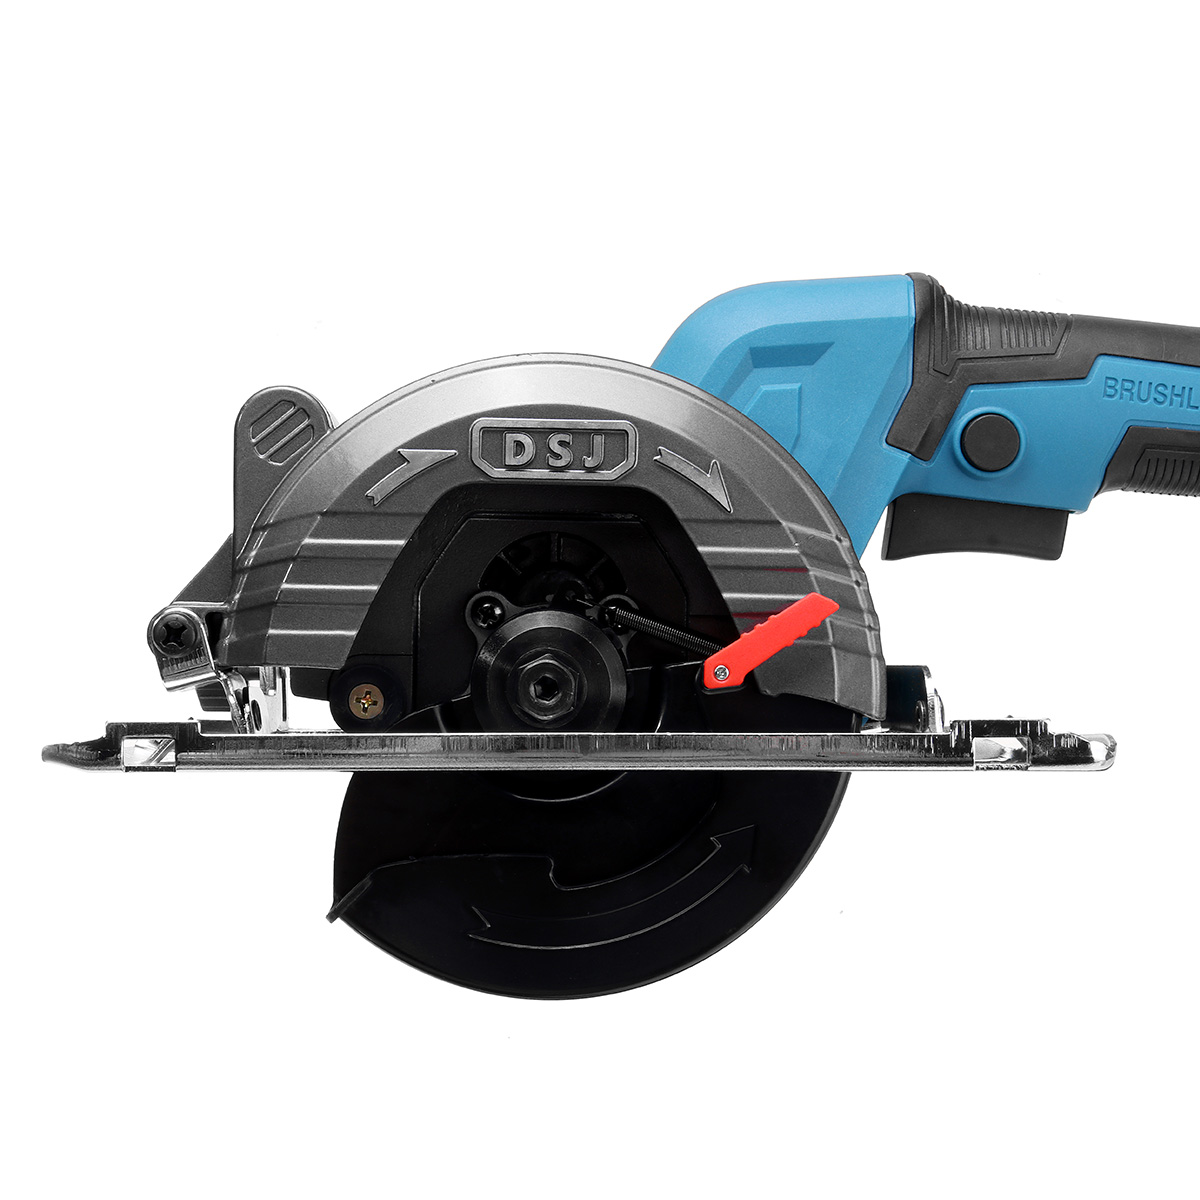 Find Electric Circular Saw 388VF 125mm Saw Blade Brushless Multi Angle Cutting Suitable With 18v Battery for Sale on Gipsybee.com with cryptocurrencies